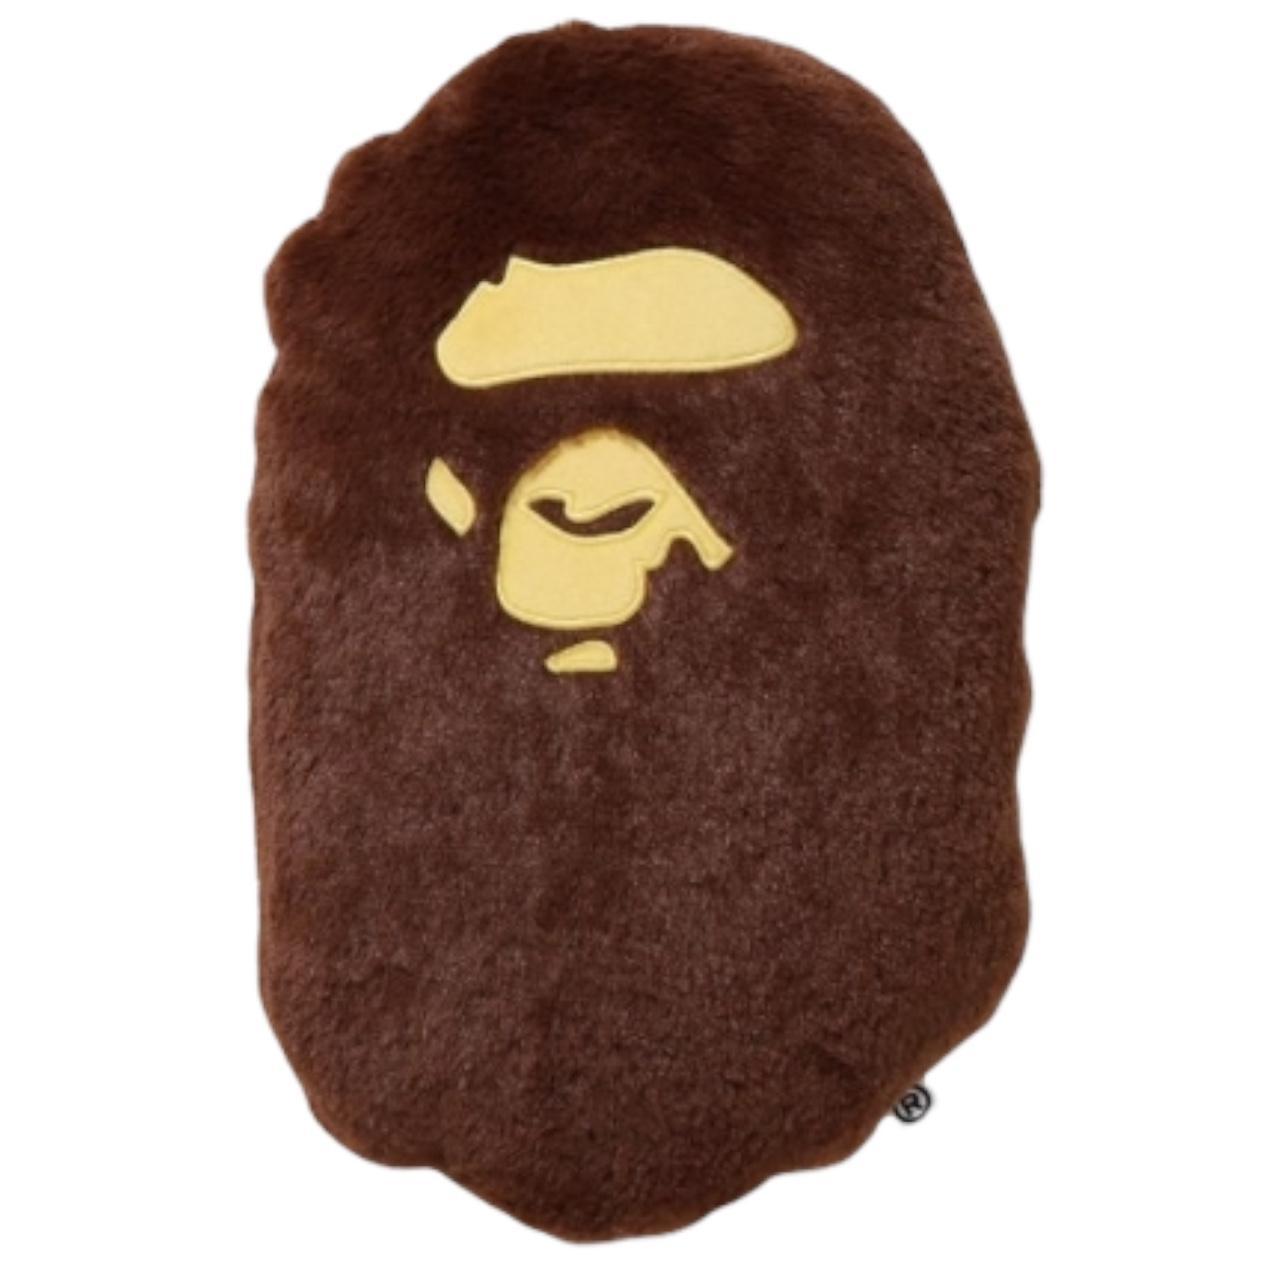 BAPE Head Pillow - VERY soft , Brand New In